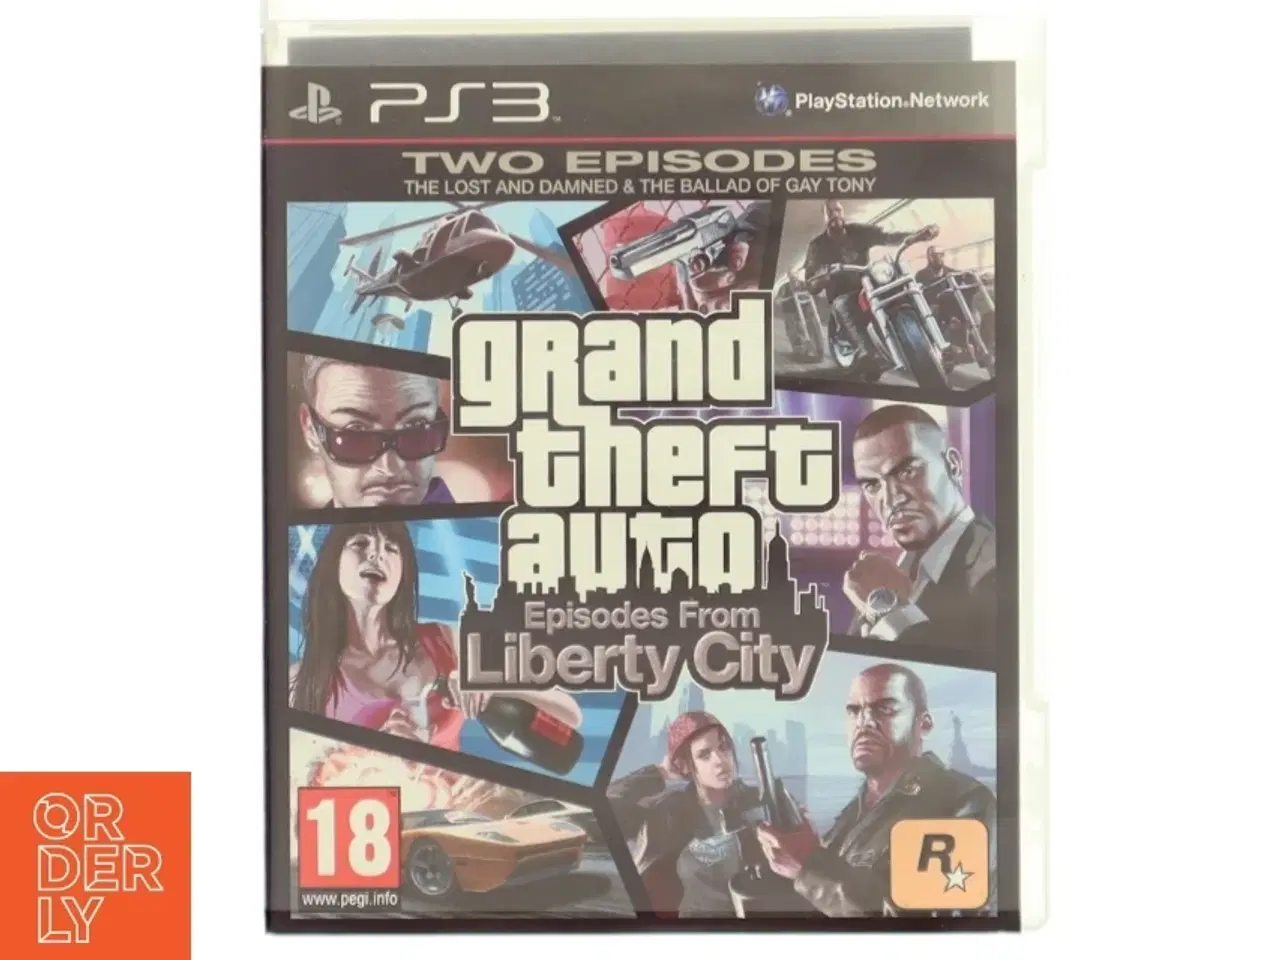 Billede 1 - Grand Theft Auto: Episodes from Liberty City - PS3 fra Rockstar Games